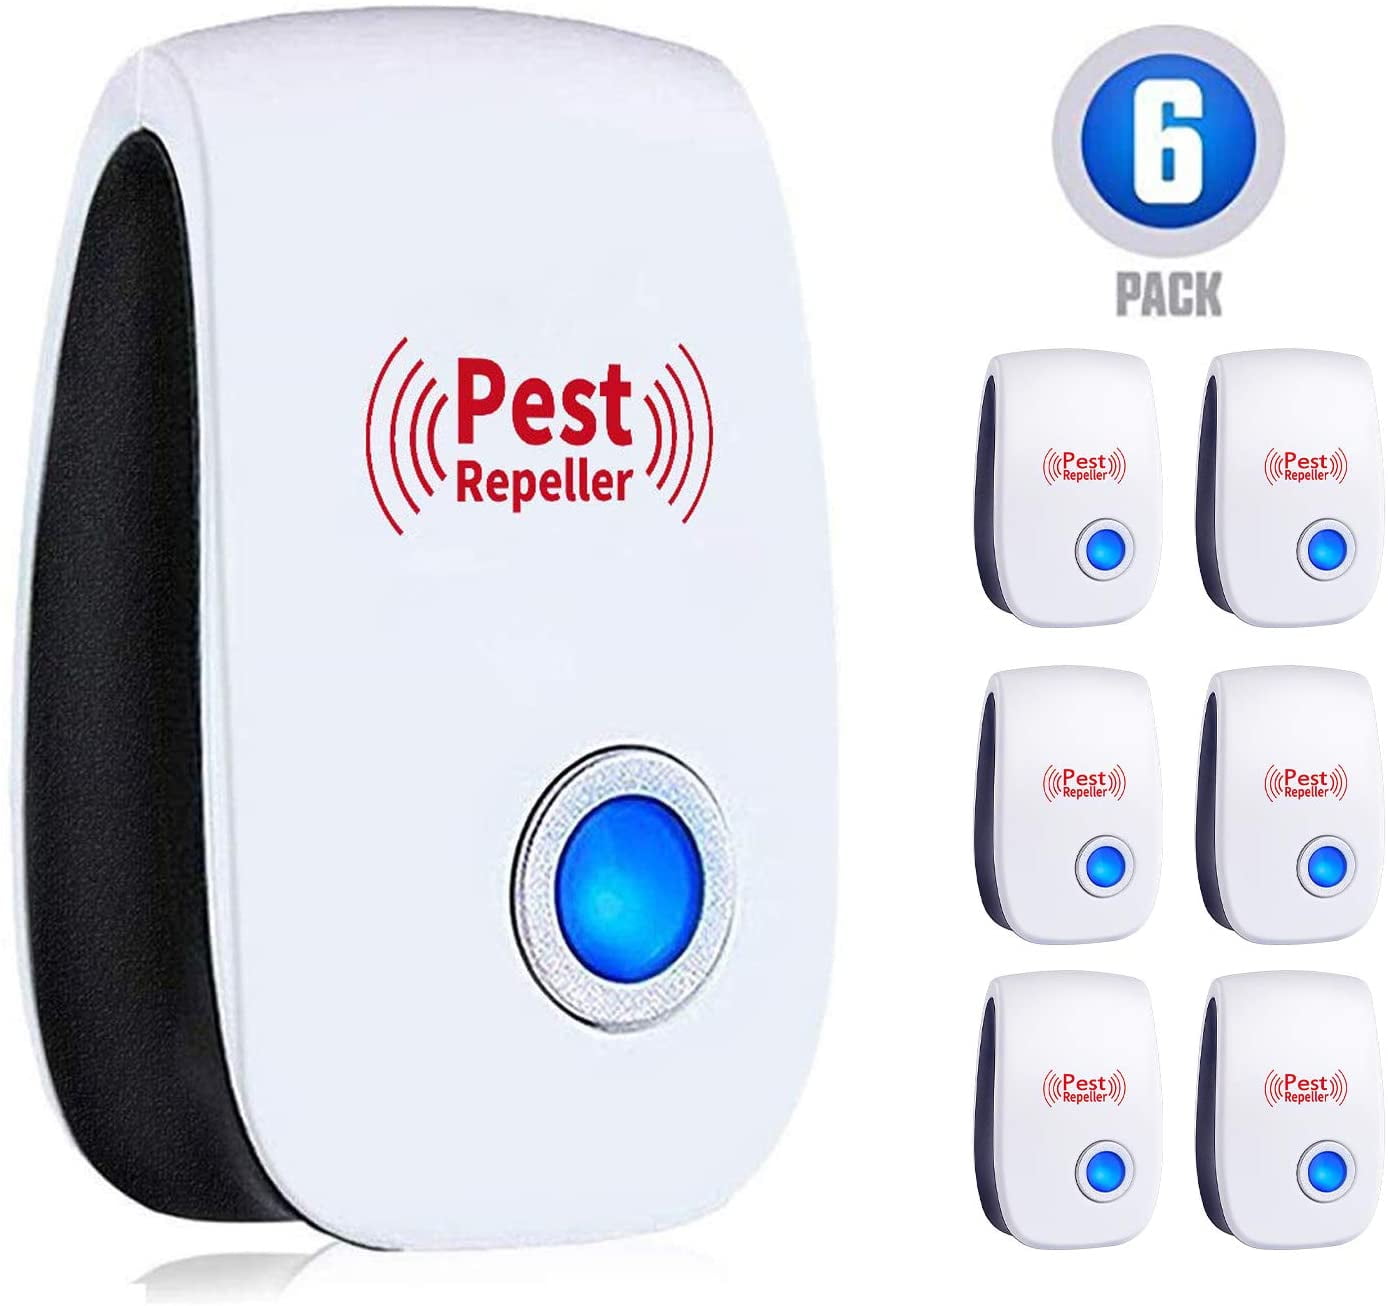 3PCS Plug-in Ultrasonic Pest Control Repeller Reject Rat Mouse Mice Spider UK 